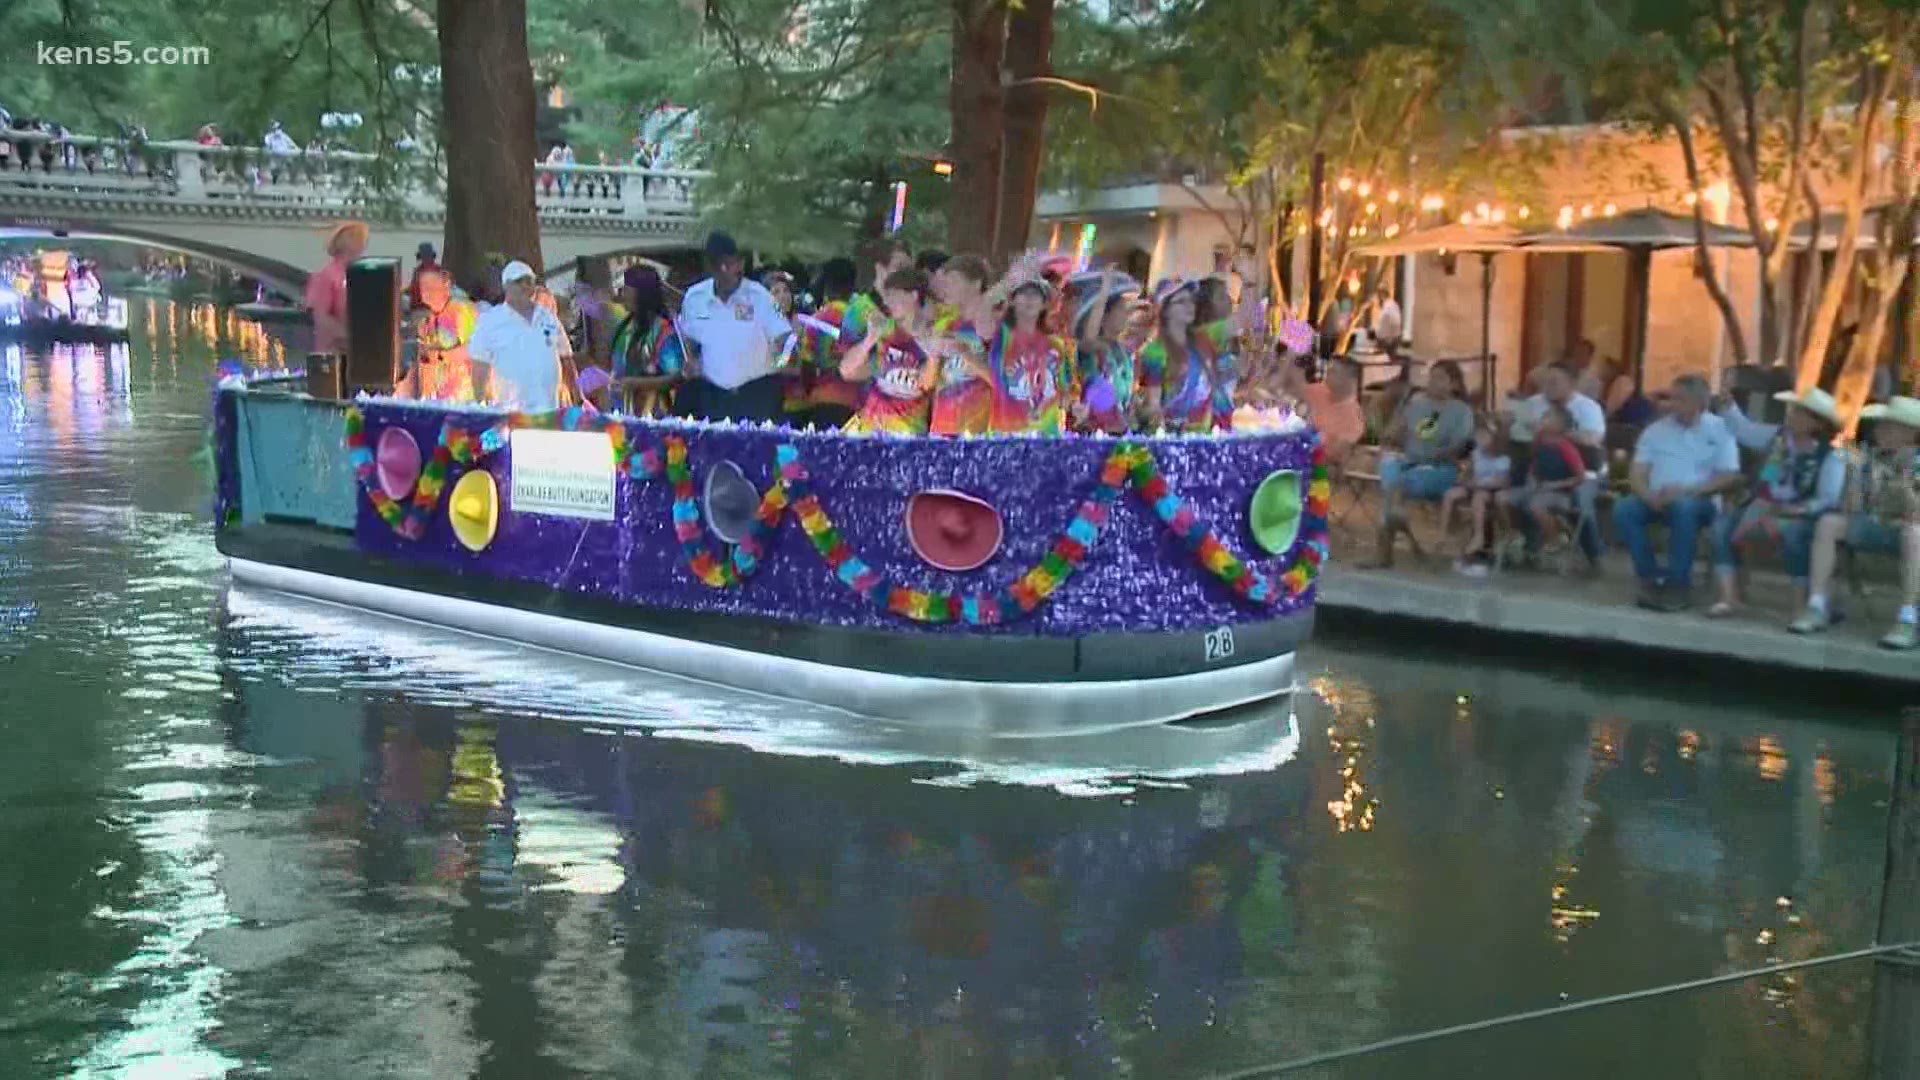 It will be the only major parade at Fiesta this year, and some lining the River Walk were excited to be back while others experienced their first Fiesta